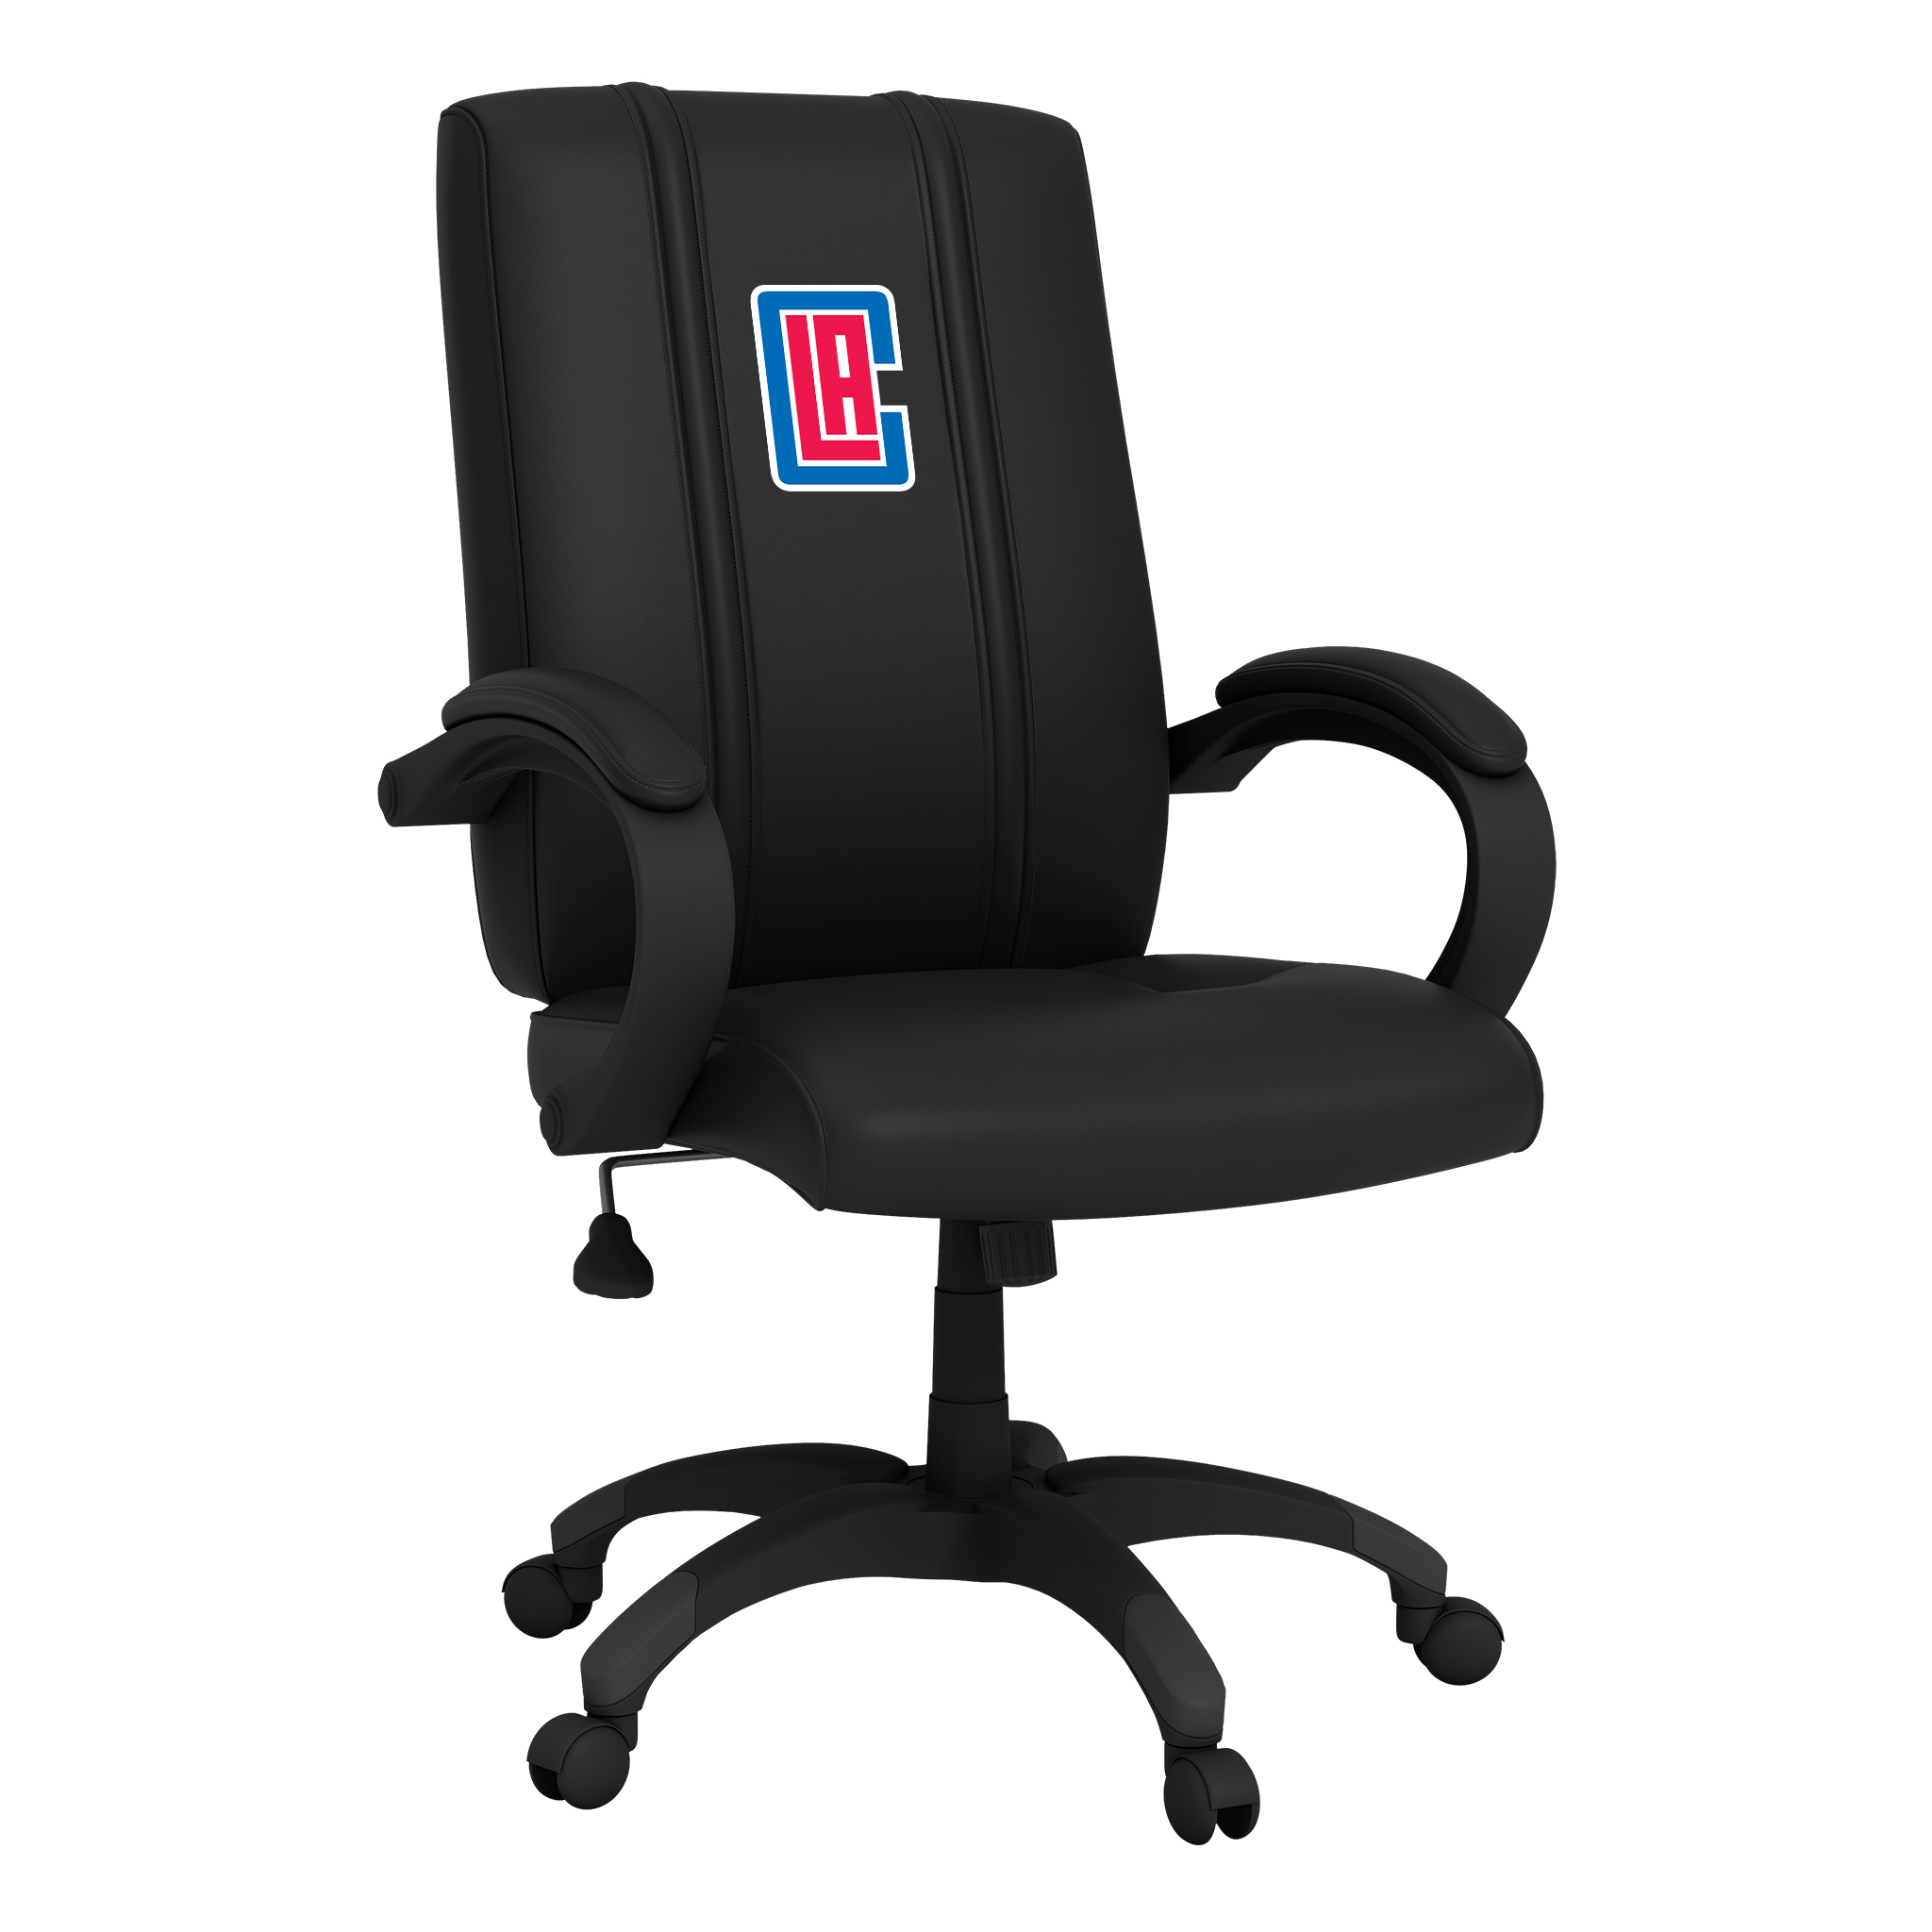 Los Angeles Clippers Office Chair 1000 with Los Angeles Clippers Secondary